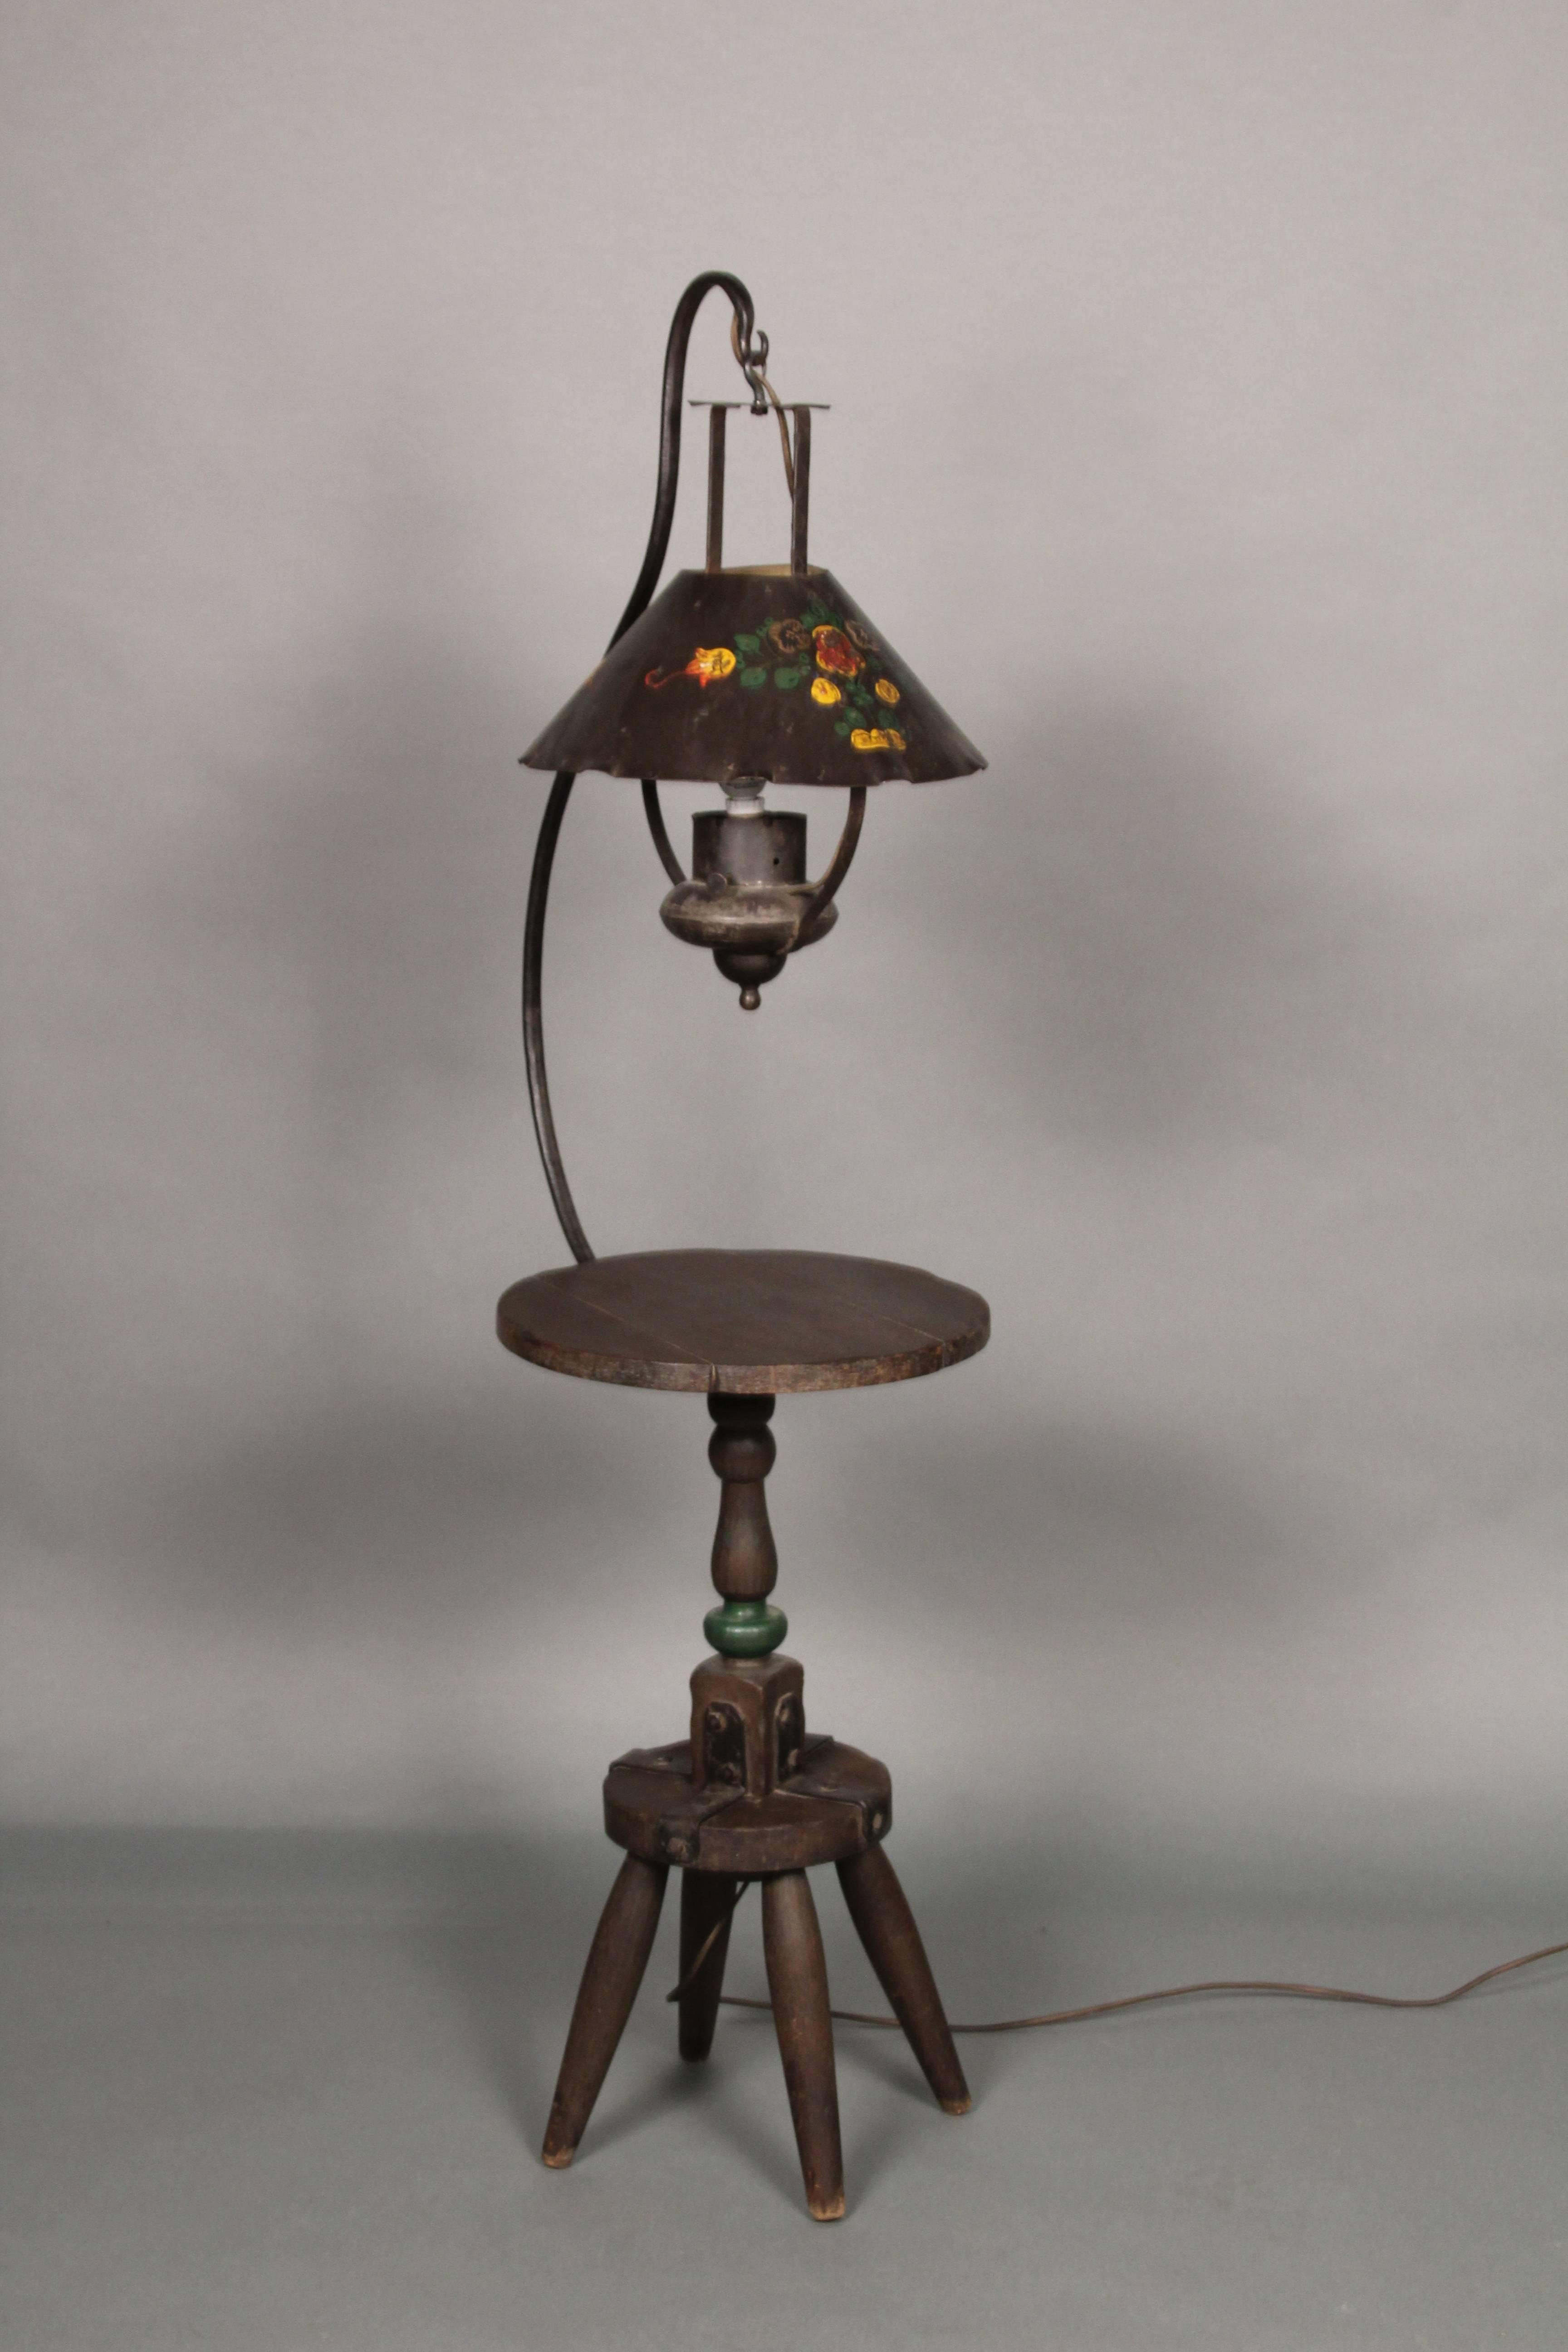 Monterey old wood tabletop floor lamp with milk stool base, circa 1930s. Iron strapping. Floral painted iron shade. Polychrome paint on base.